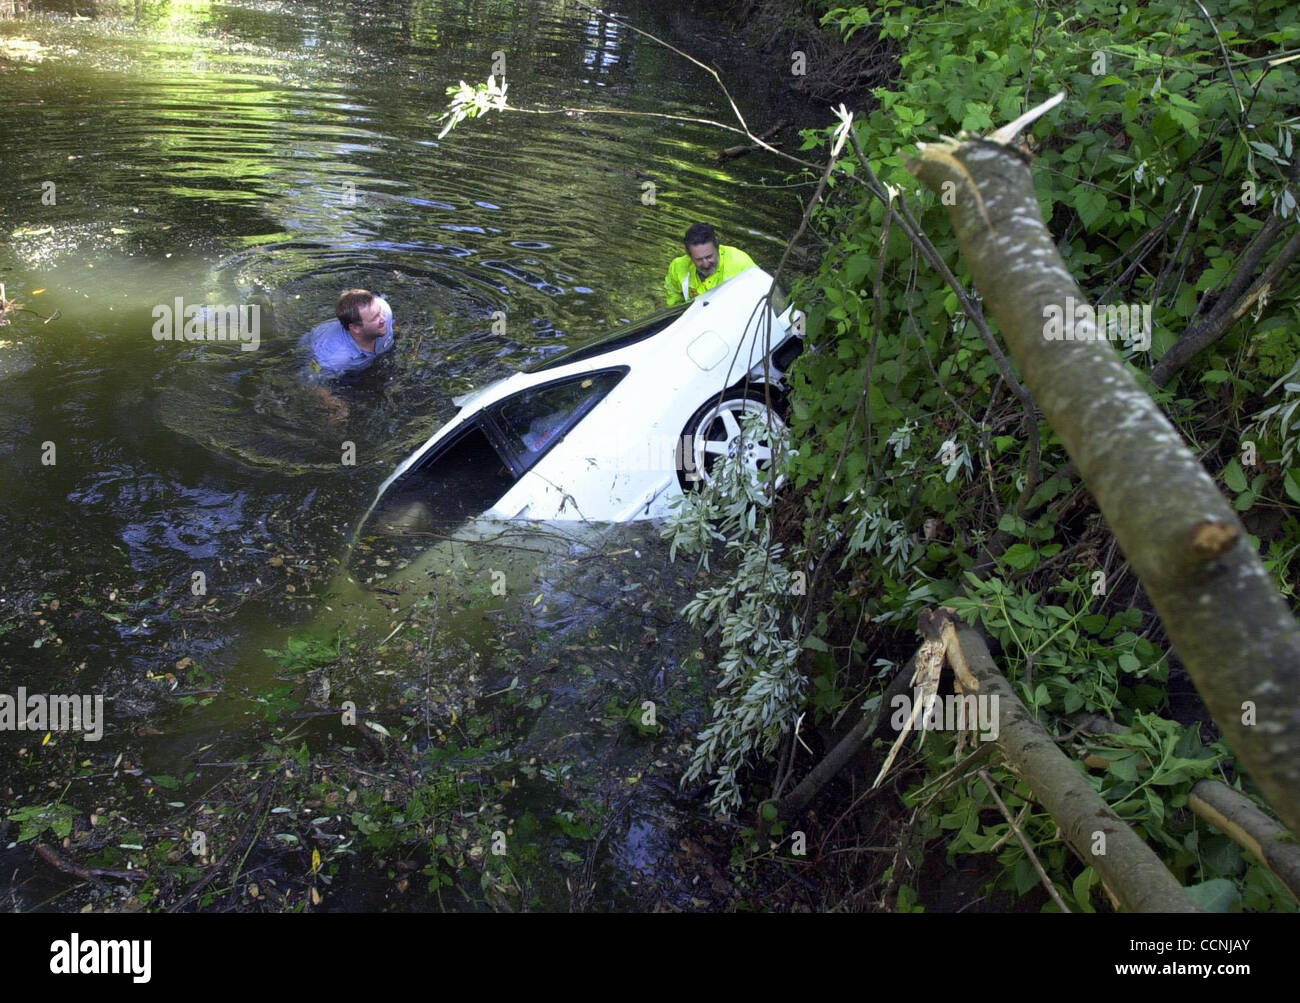 Eric Westlund, left, and James Nelmes from Lamorinda Tow go into a creek to attach cables to a car that went into a creek in Moraga, Calif. Friday, May 14, 2004. (Contra Costa Newspapers /Kristopher Skinner) Stock Photo